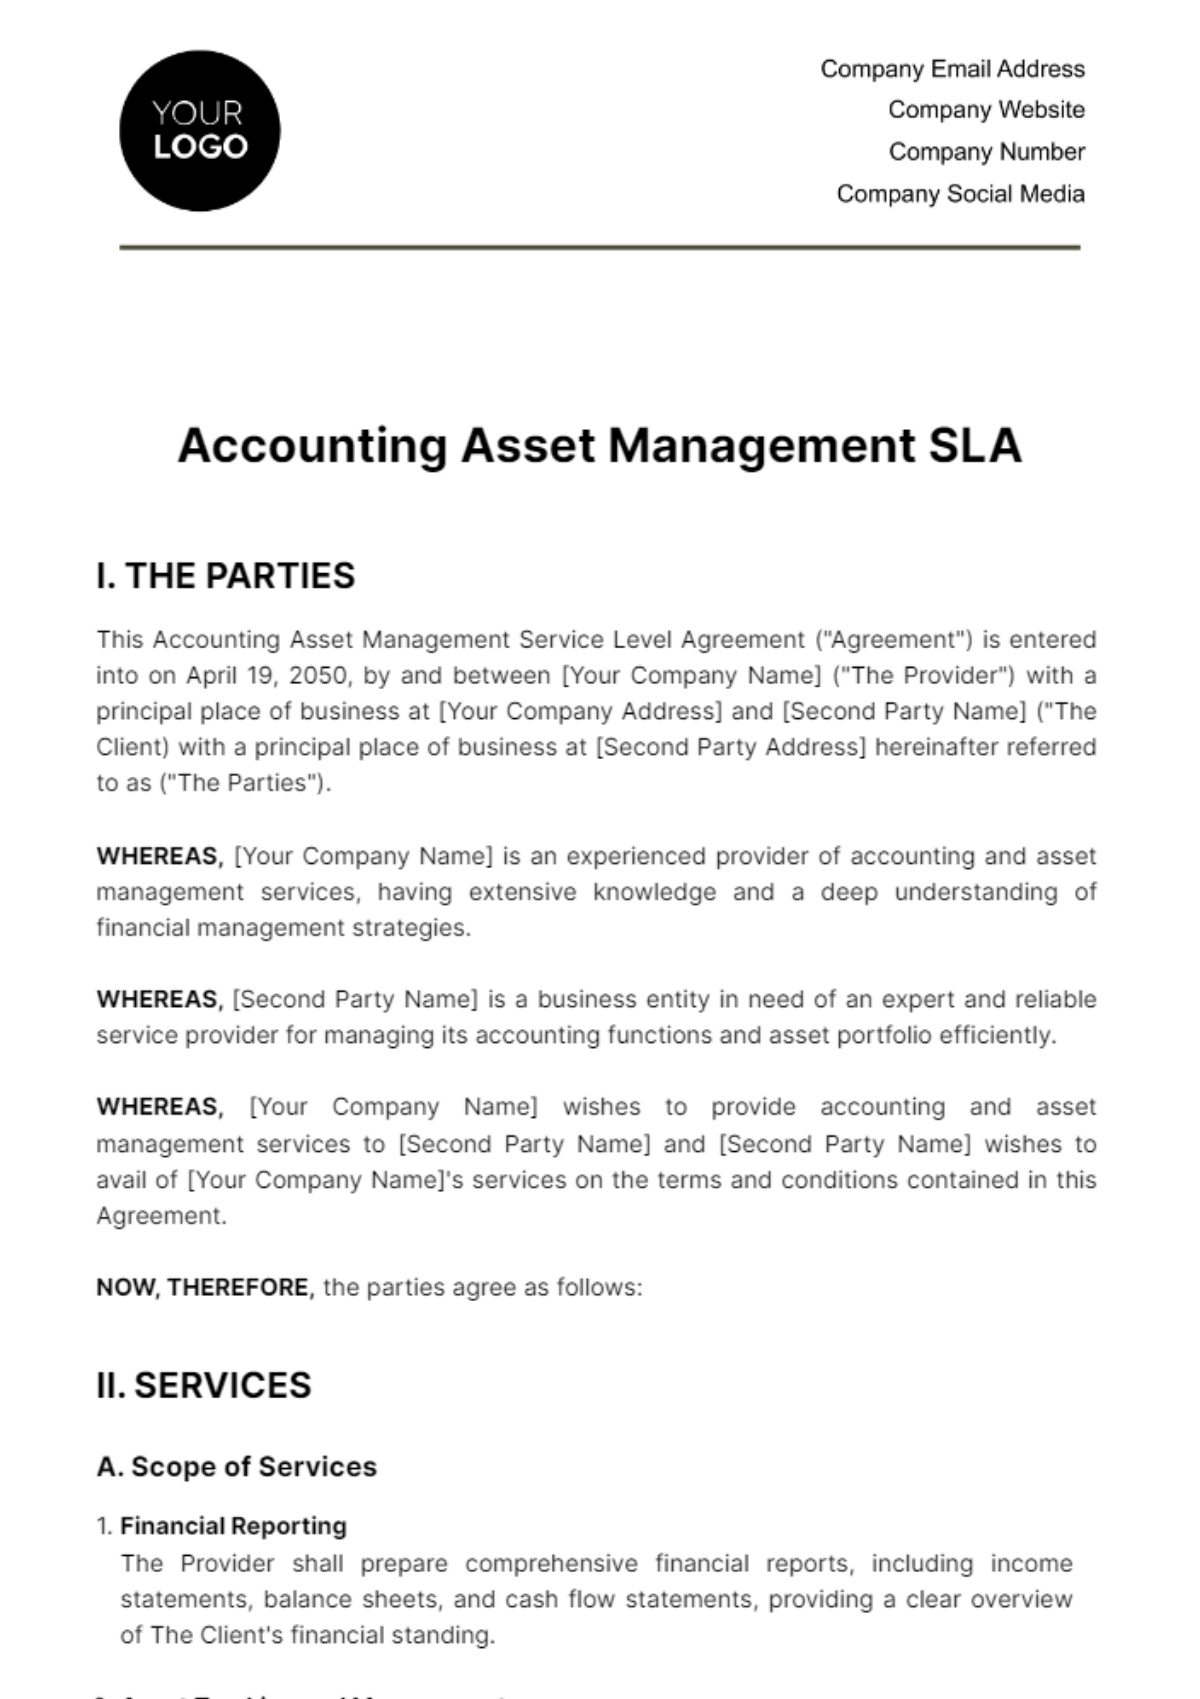 Accounting Asset Management SLA Template